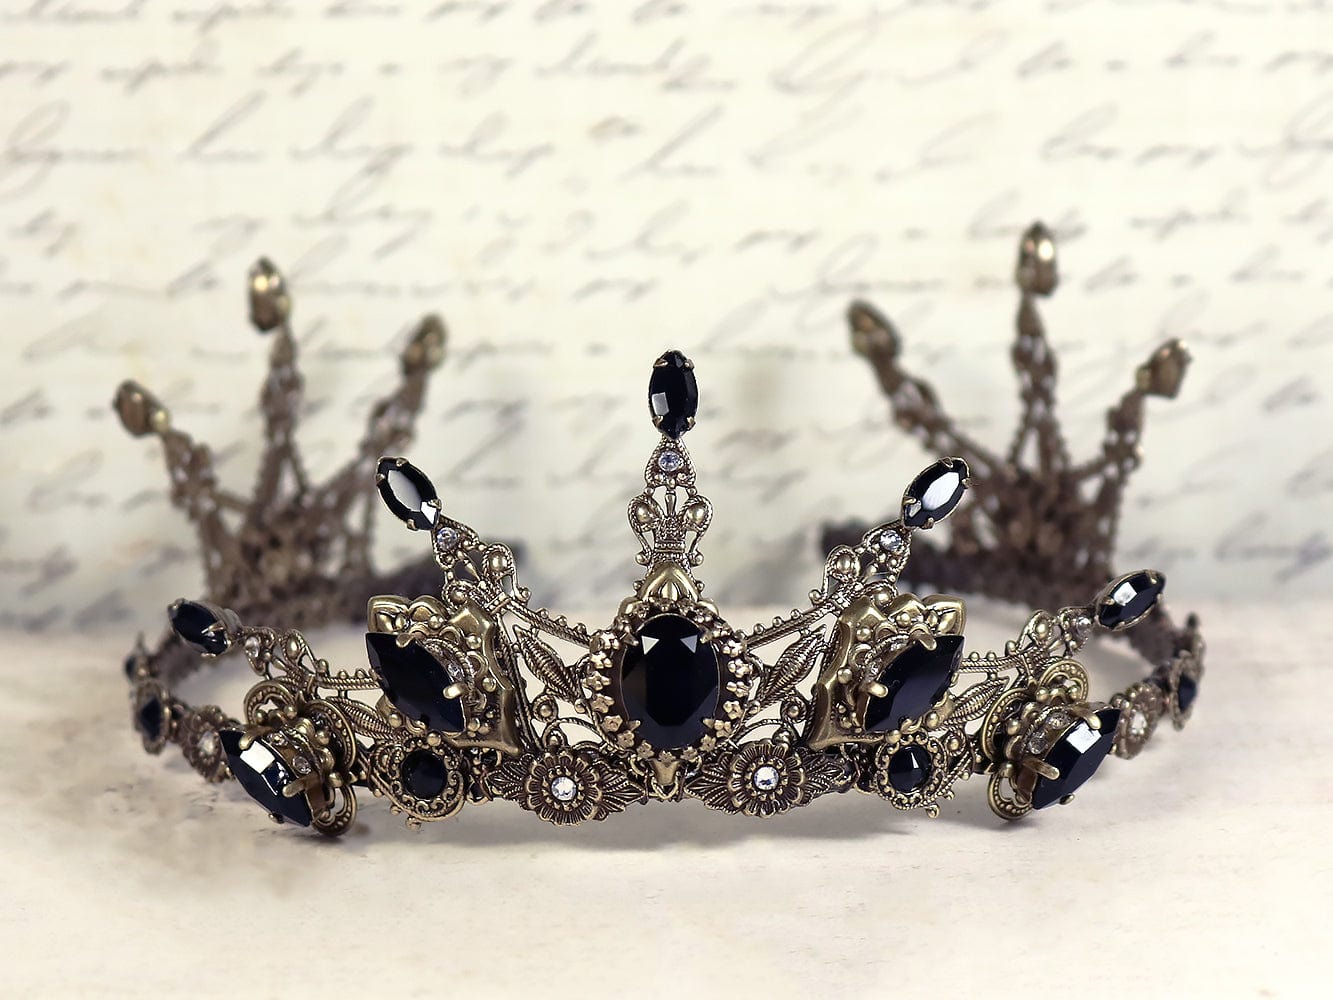 Avalon Crystal Tiara in Antiqued Brass by Rabbitwood & Reason. Stones featured: Jet Black and Crystal